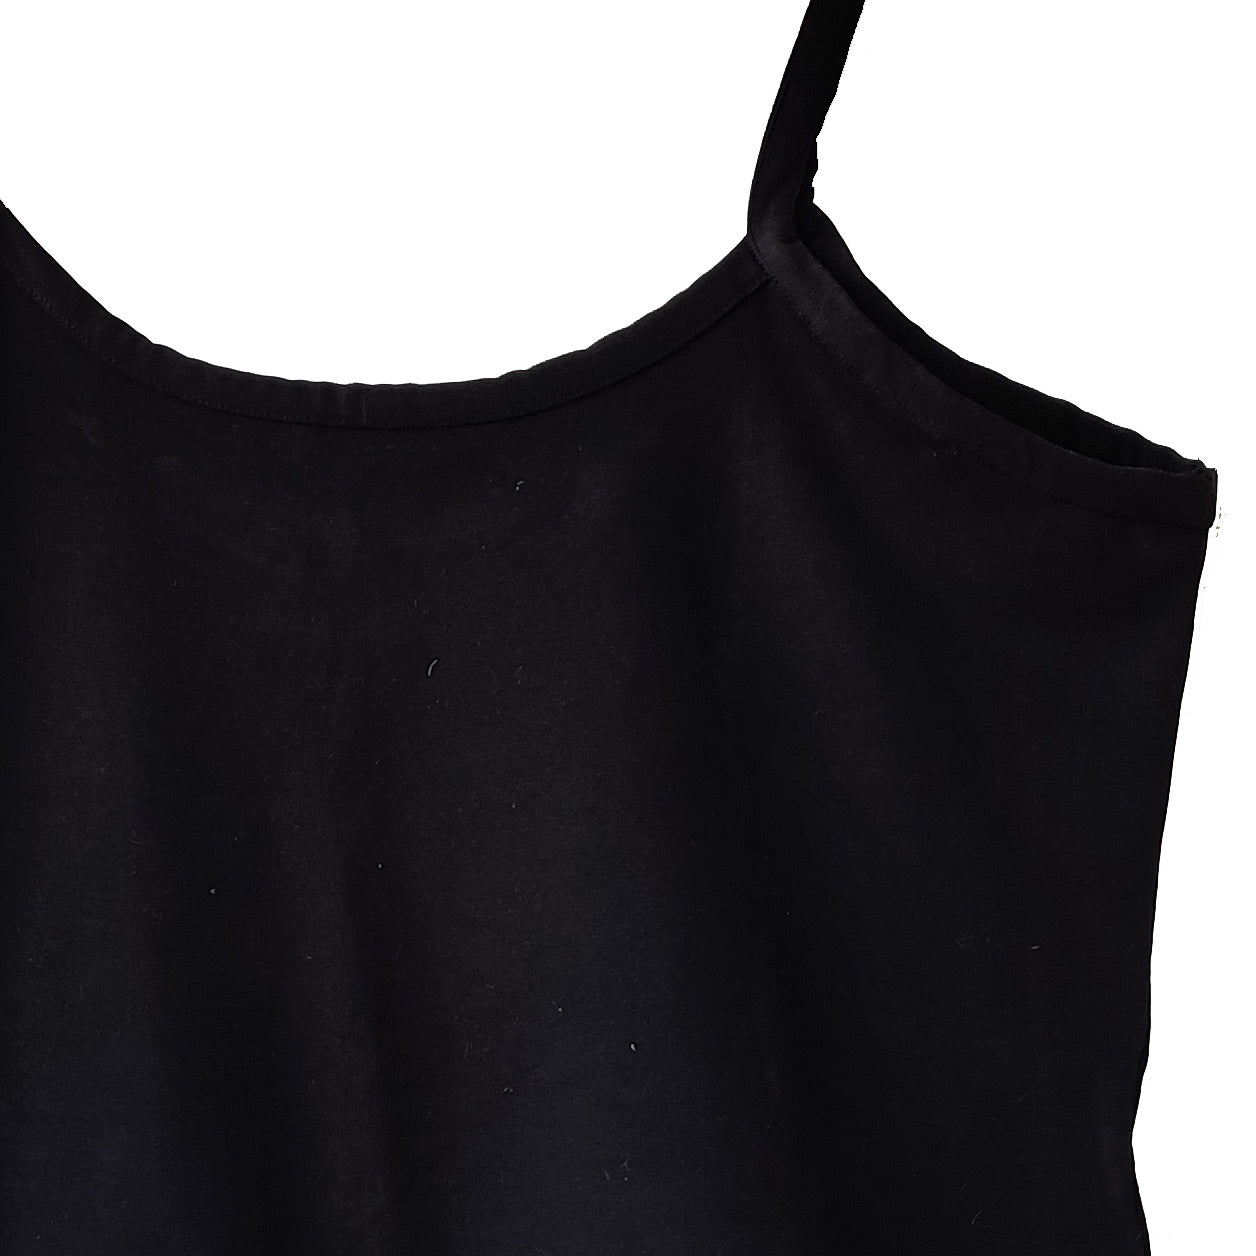 Black 4-Way Stretchable Camisole Top-Plus Size Clothing(XS-10XL)